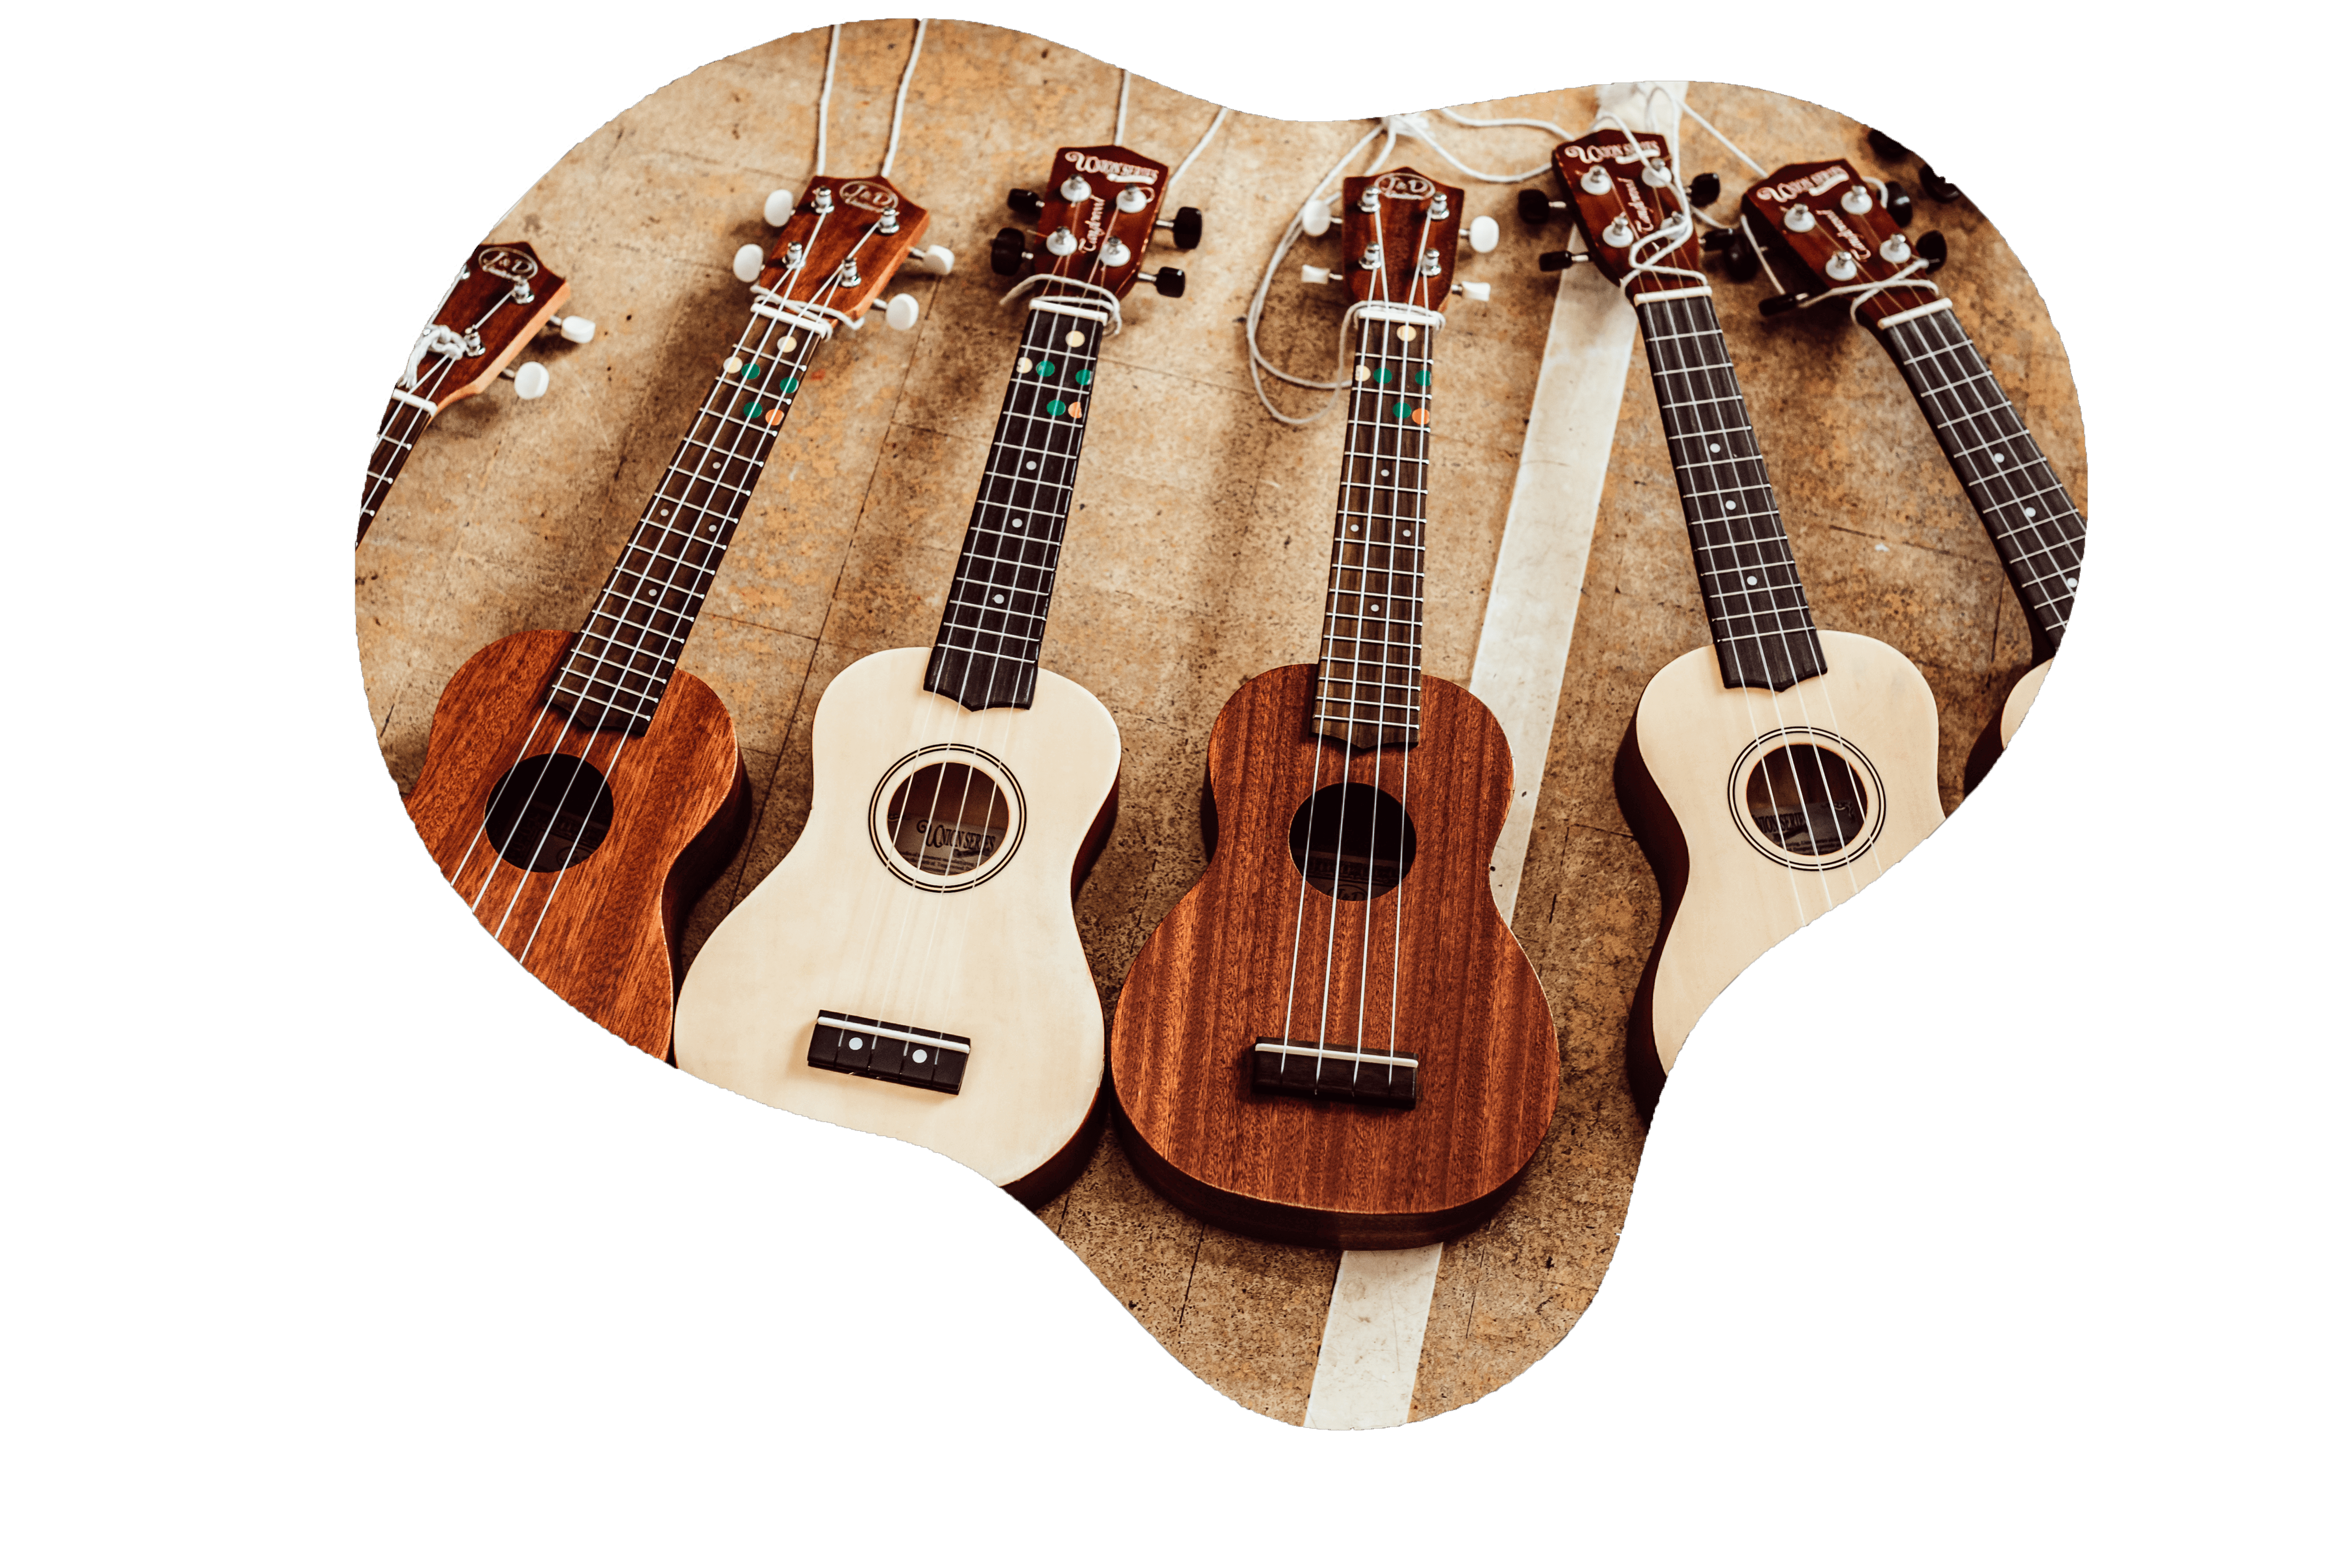 Four ukuleles with varying wood finishes are arranged in a fan shape on a surface with faded, broad stripes, suggesting a setting that is both creative and musical. The smallest ukulele at the front features a lighter wood and colorful fret markers, while the others display a more traditional look, hinting at an environment that values both learning and the joy of music.